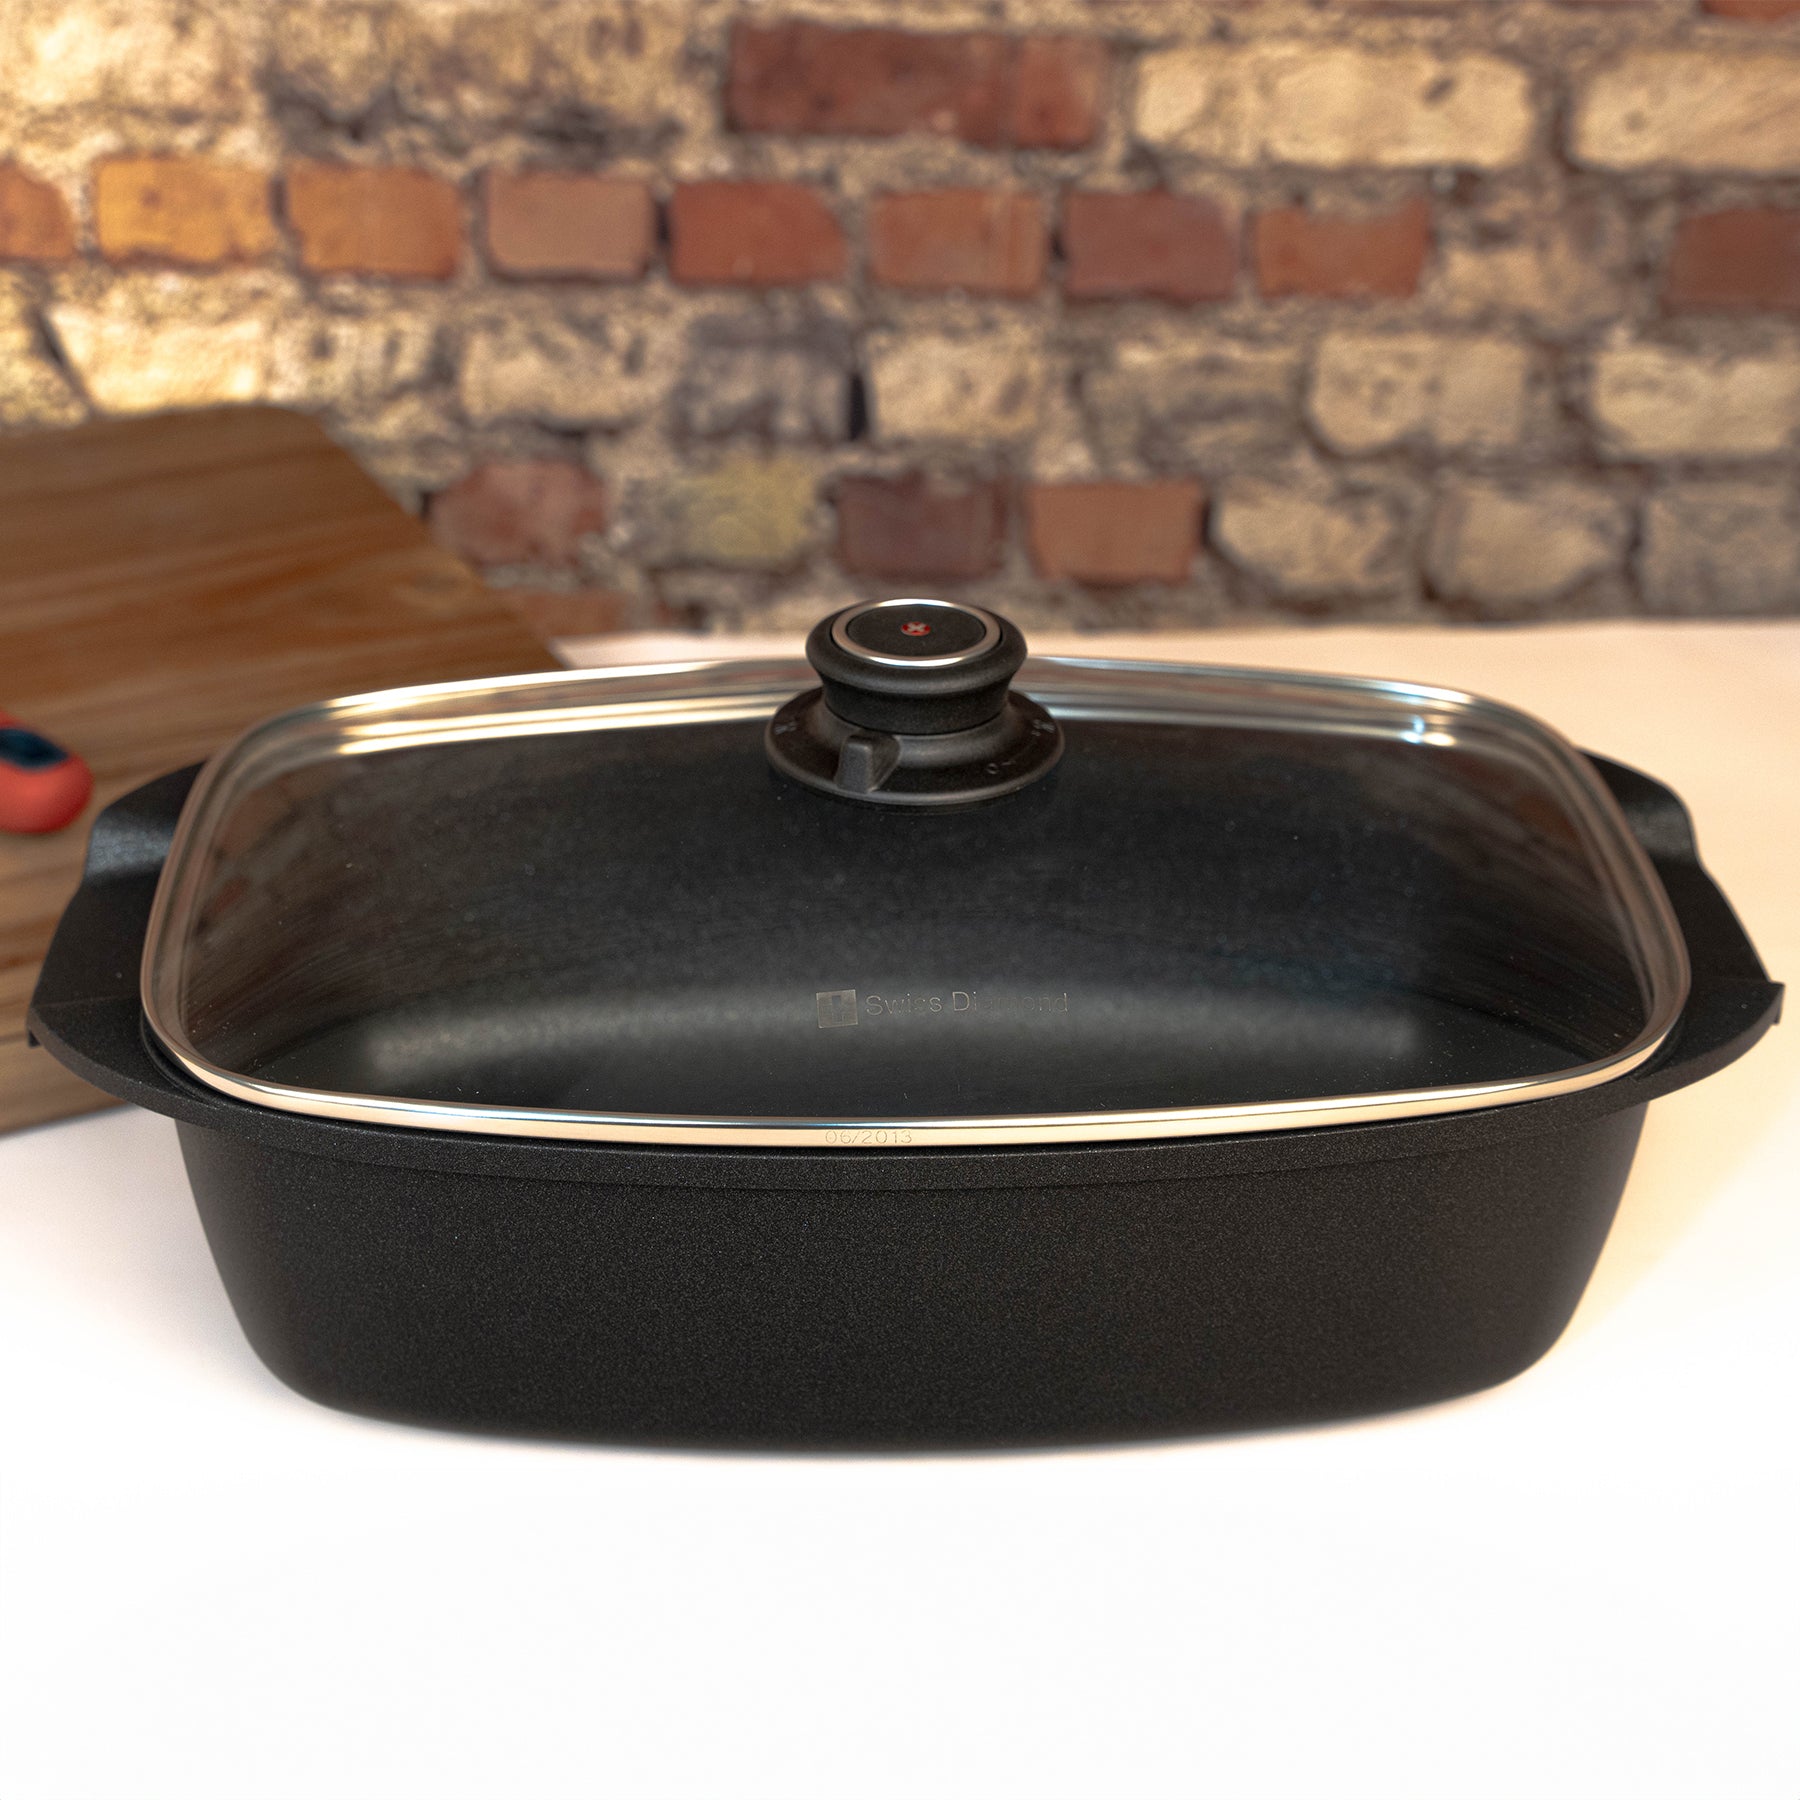 XD Nonstick 5.3 qt Roaster with Glass Lid side view on kitchen counter